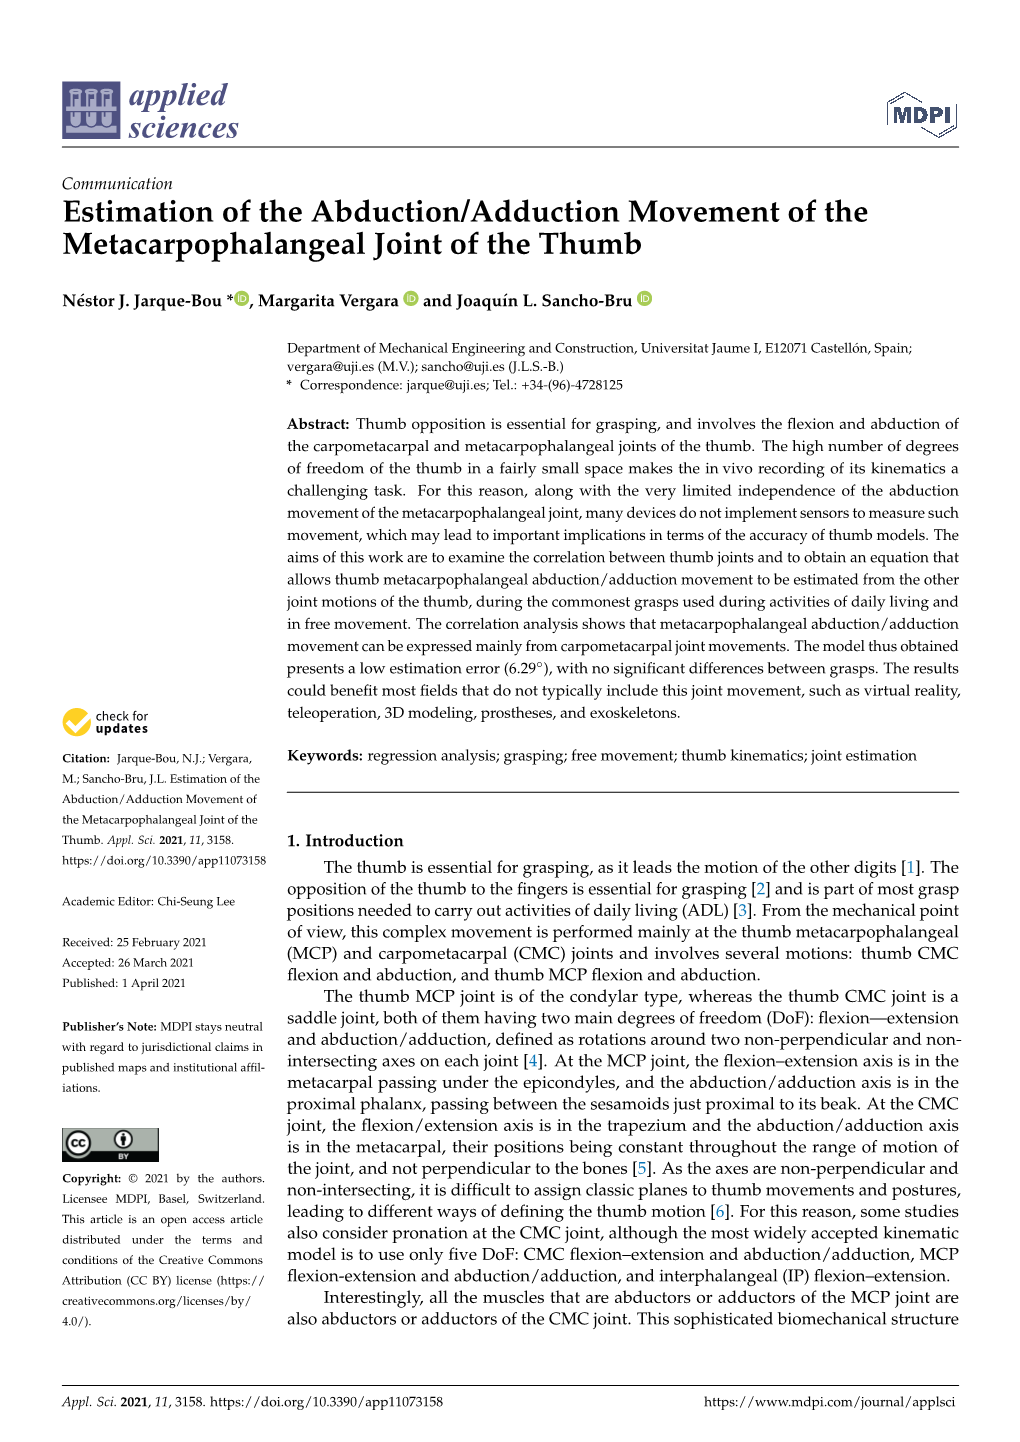 Estimation of the Abduction/Adduction Movement of the Metacarpophalangeal Joint of the Thumb